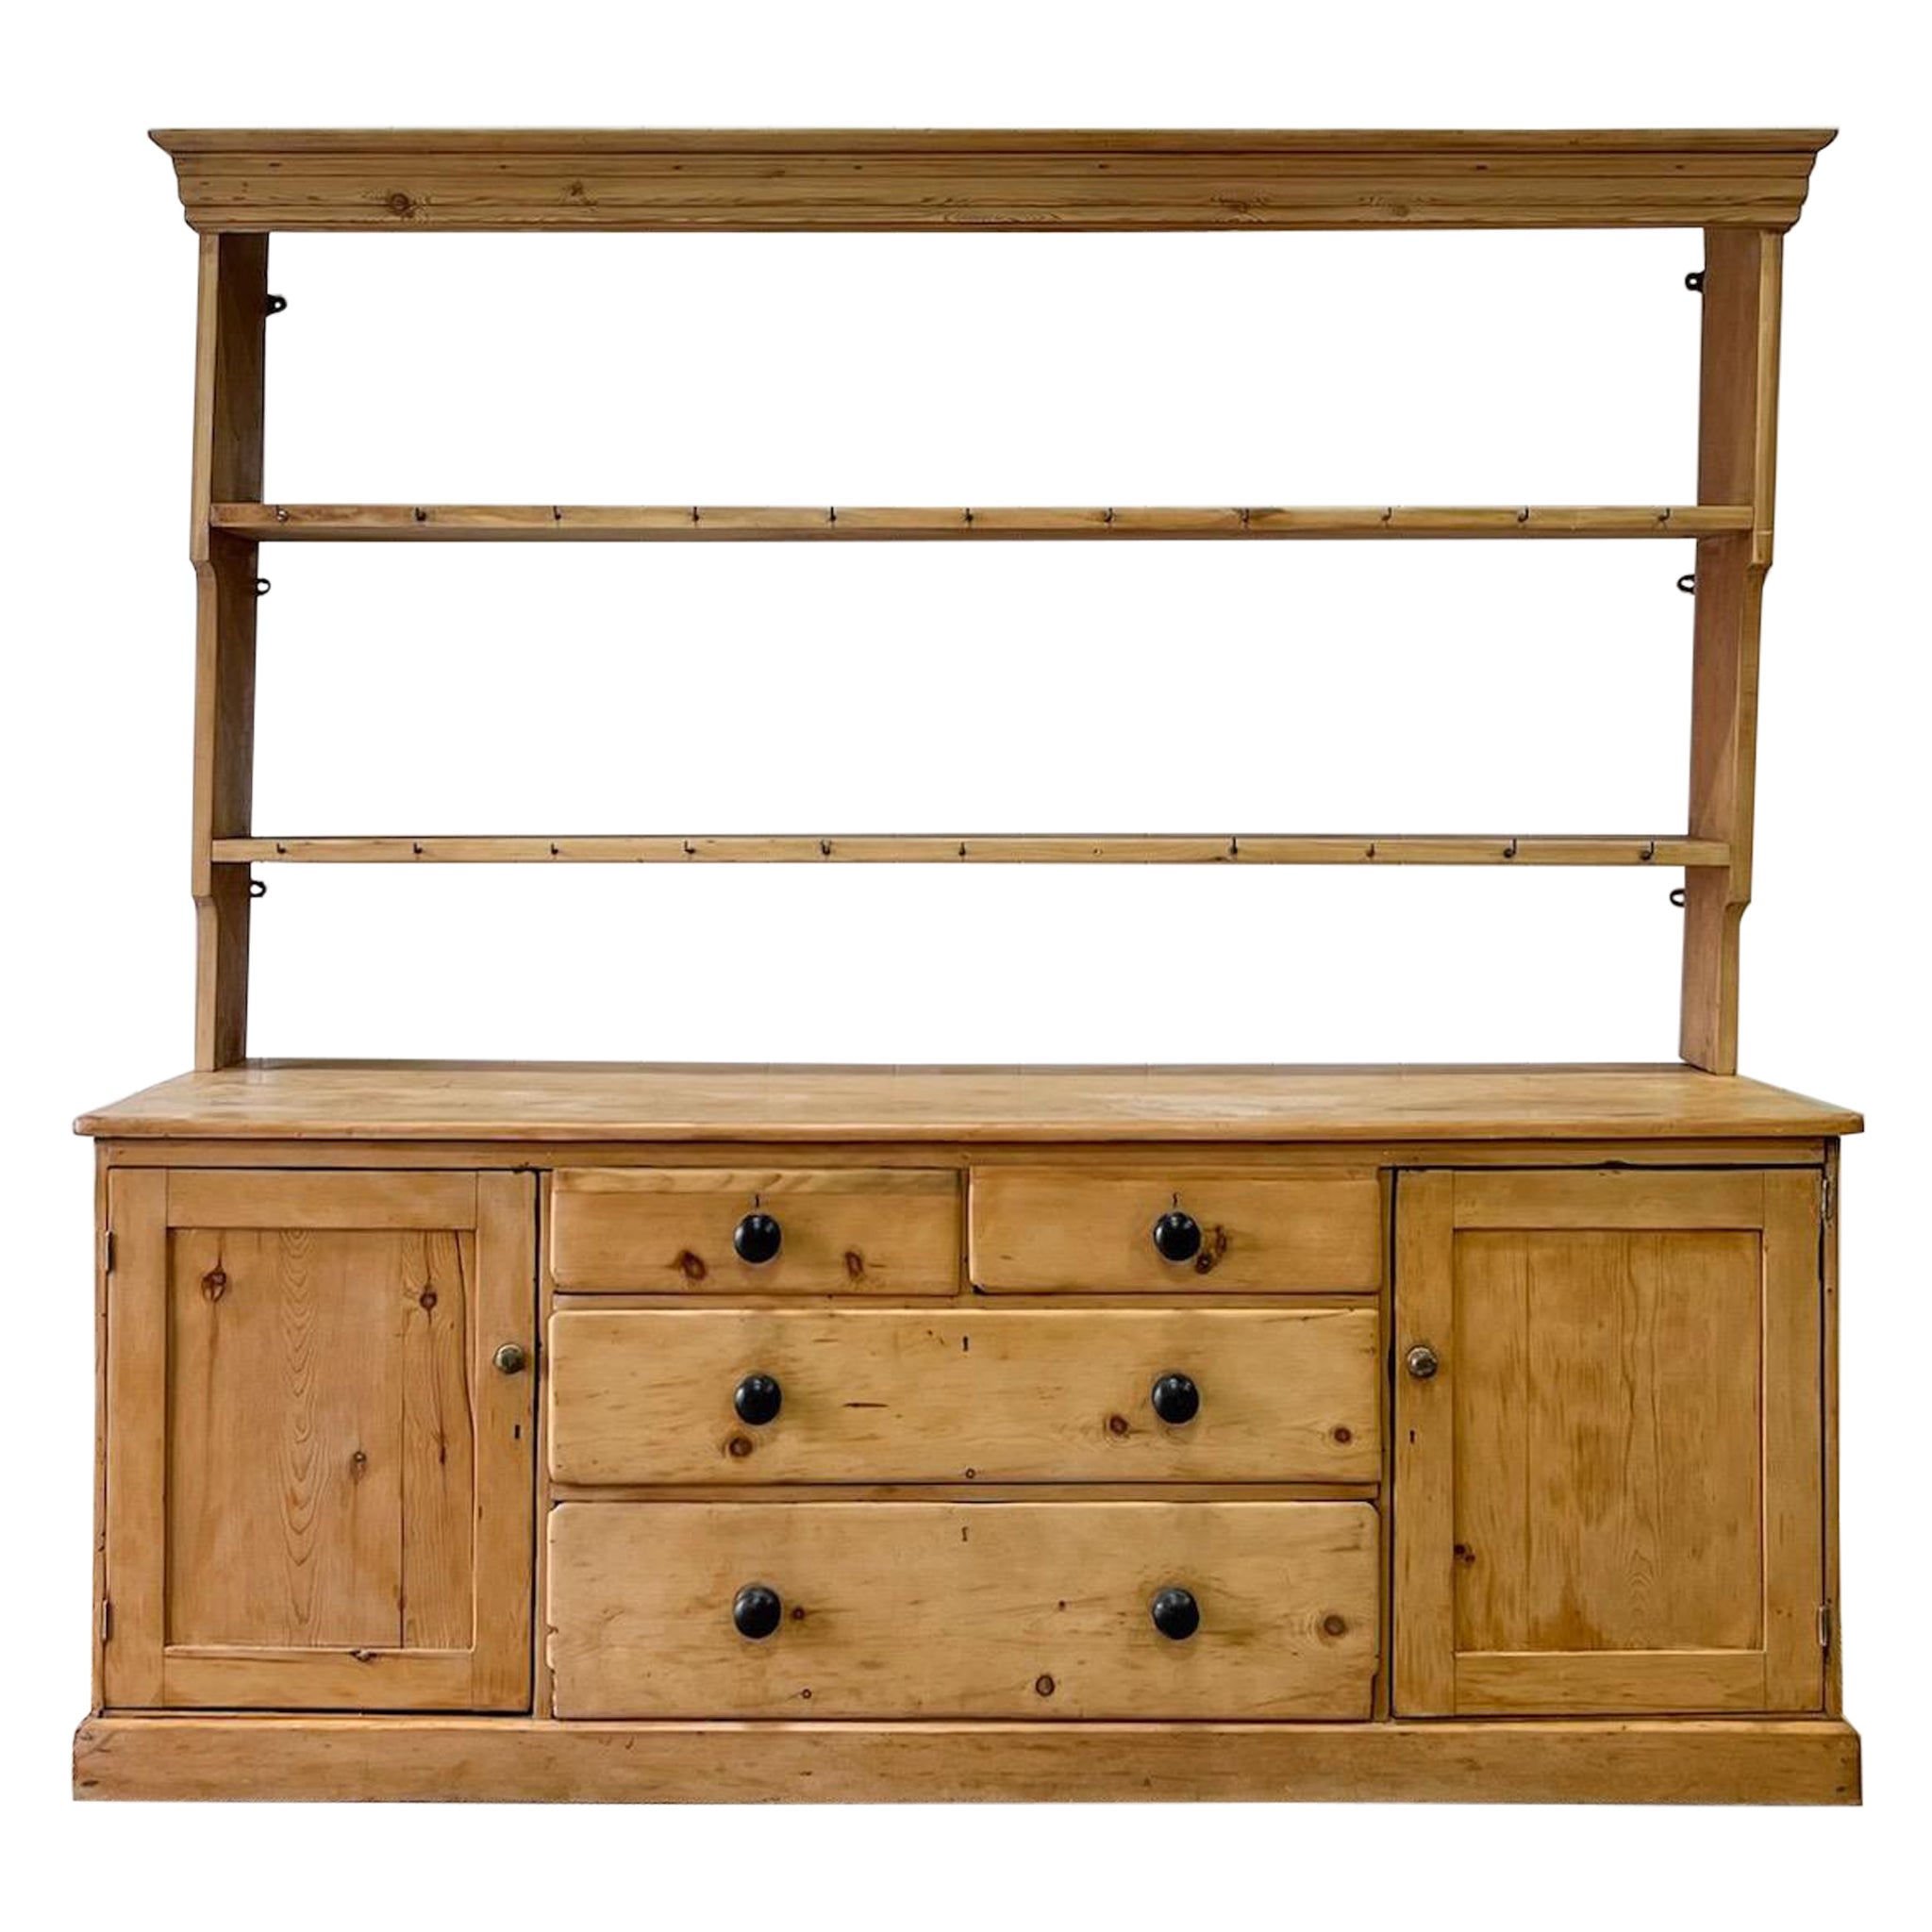 An Early 19th Century Monumental Pine Welsh Dresser or Cupboard For Sale